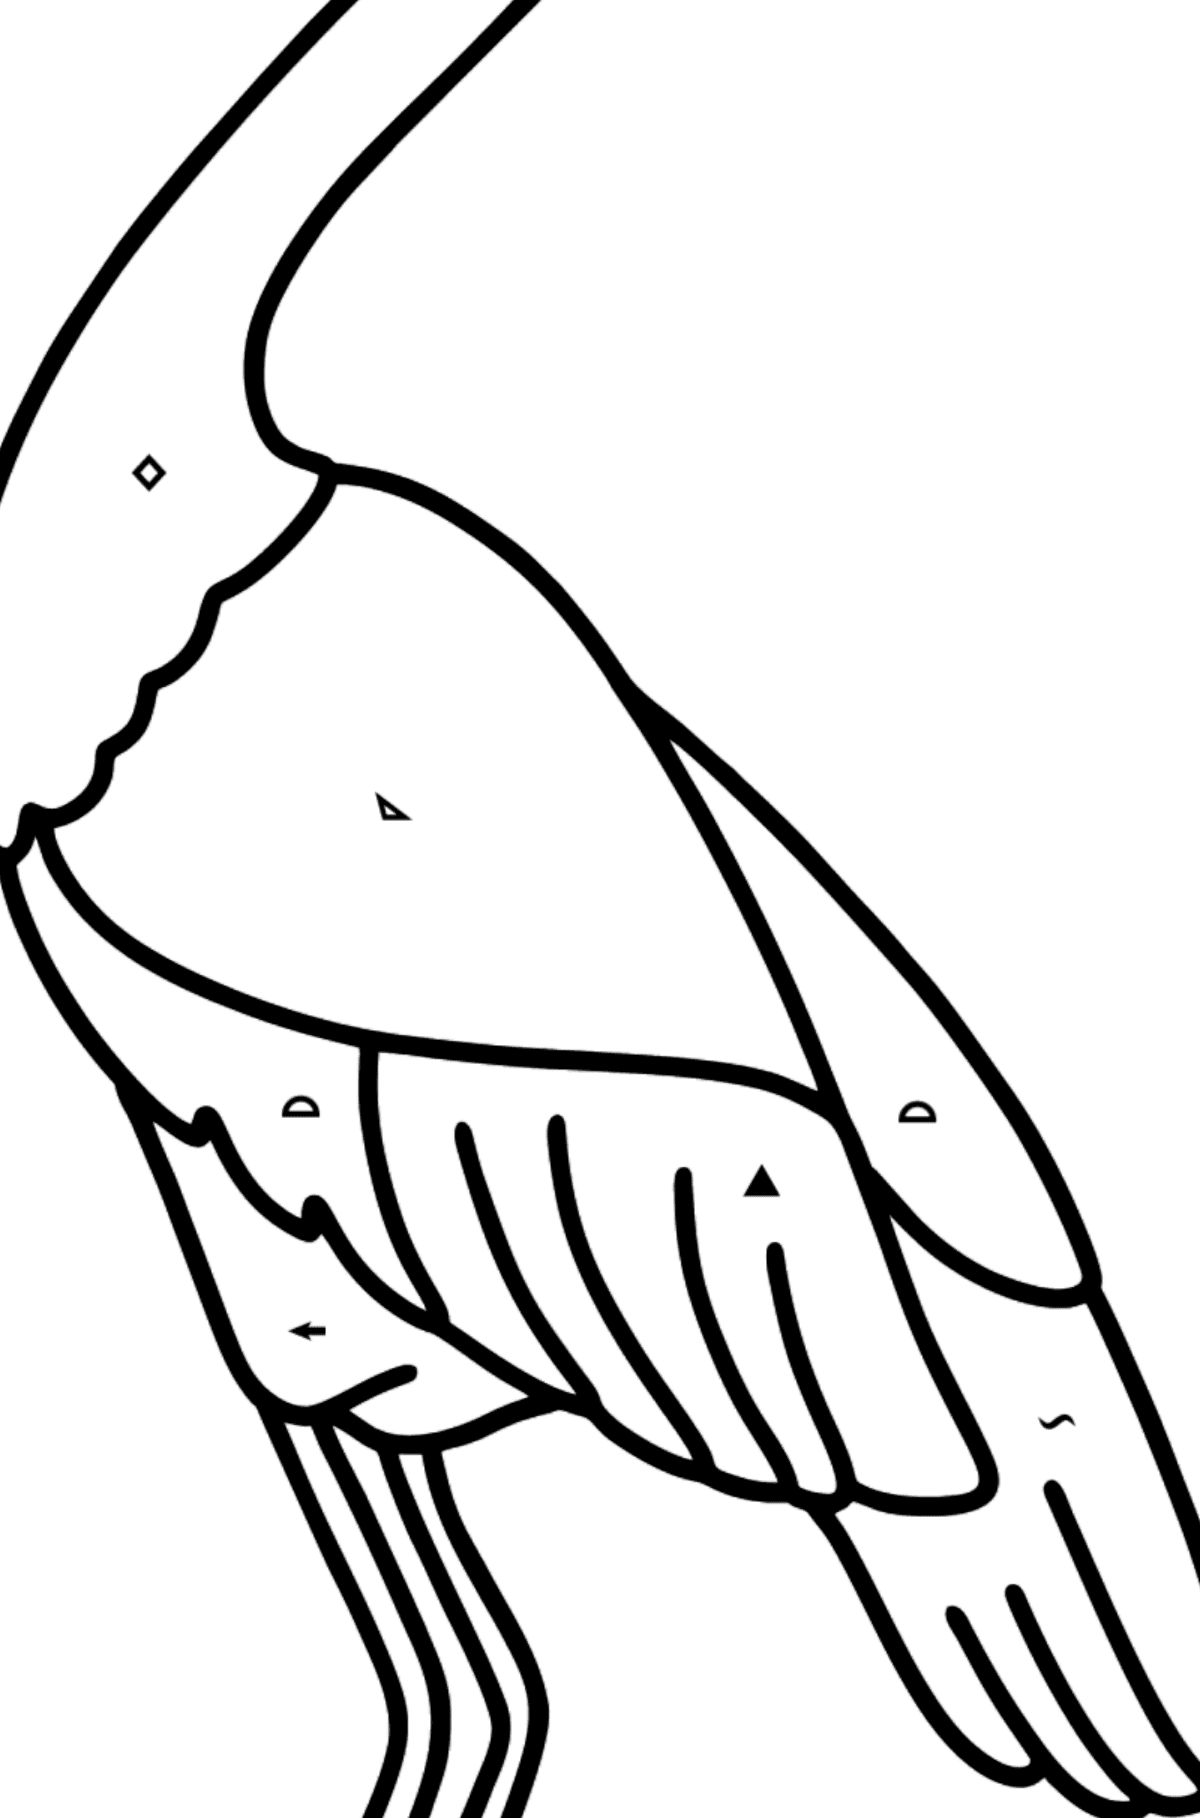 Stork coloring page - Coloring by Symbols and Geometric Shapes for Kids